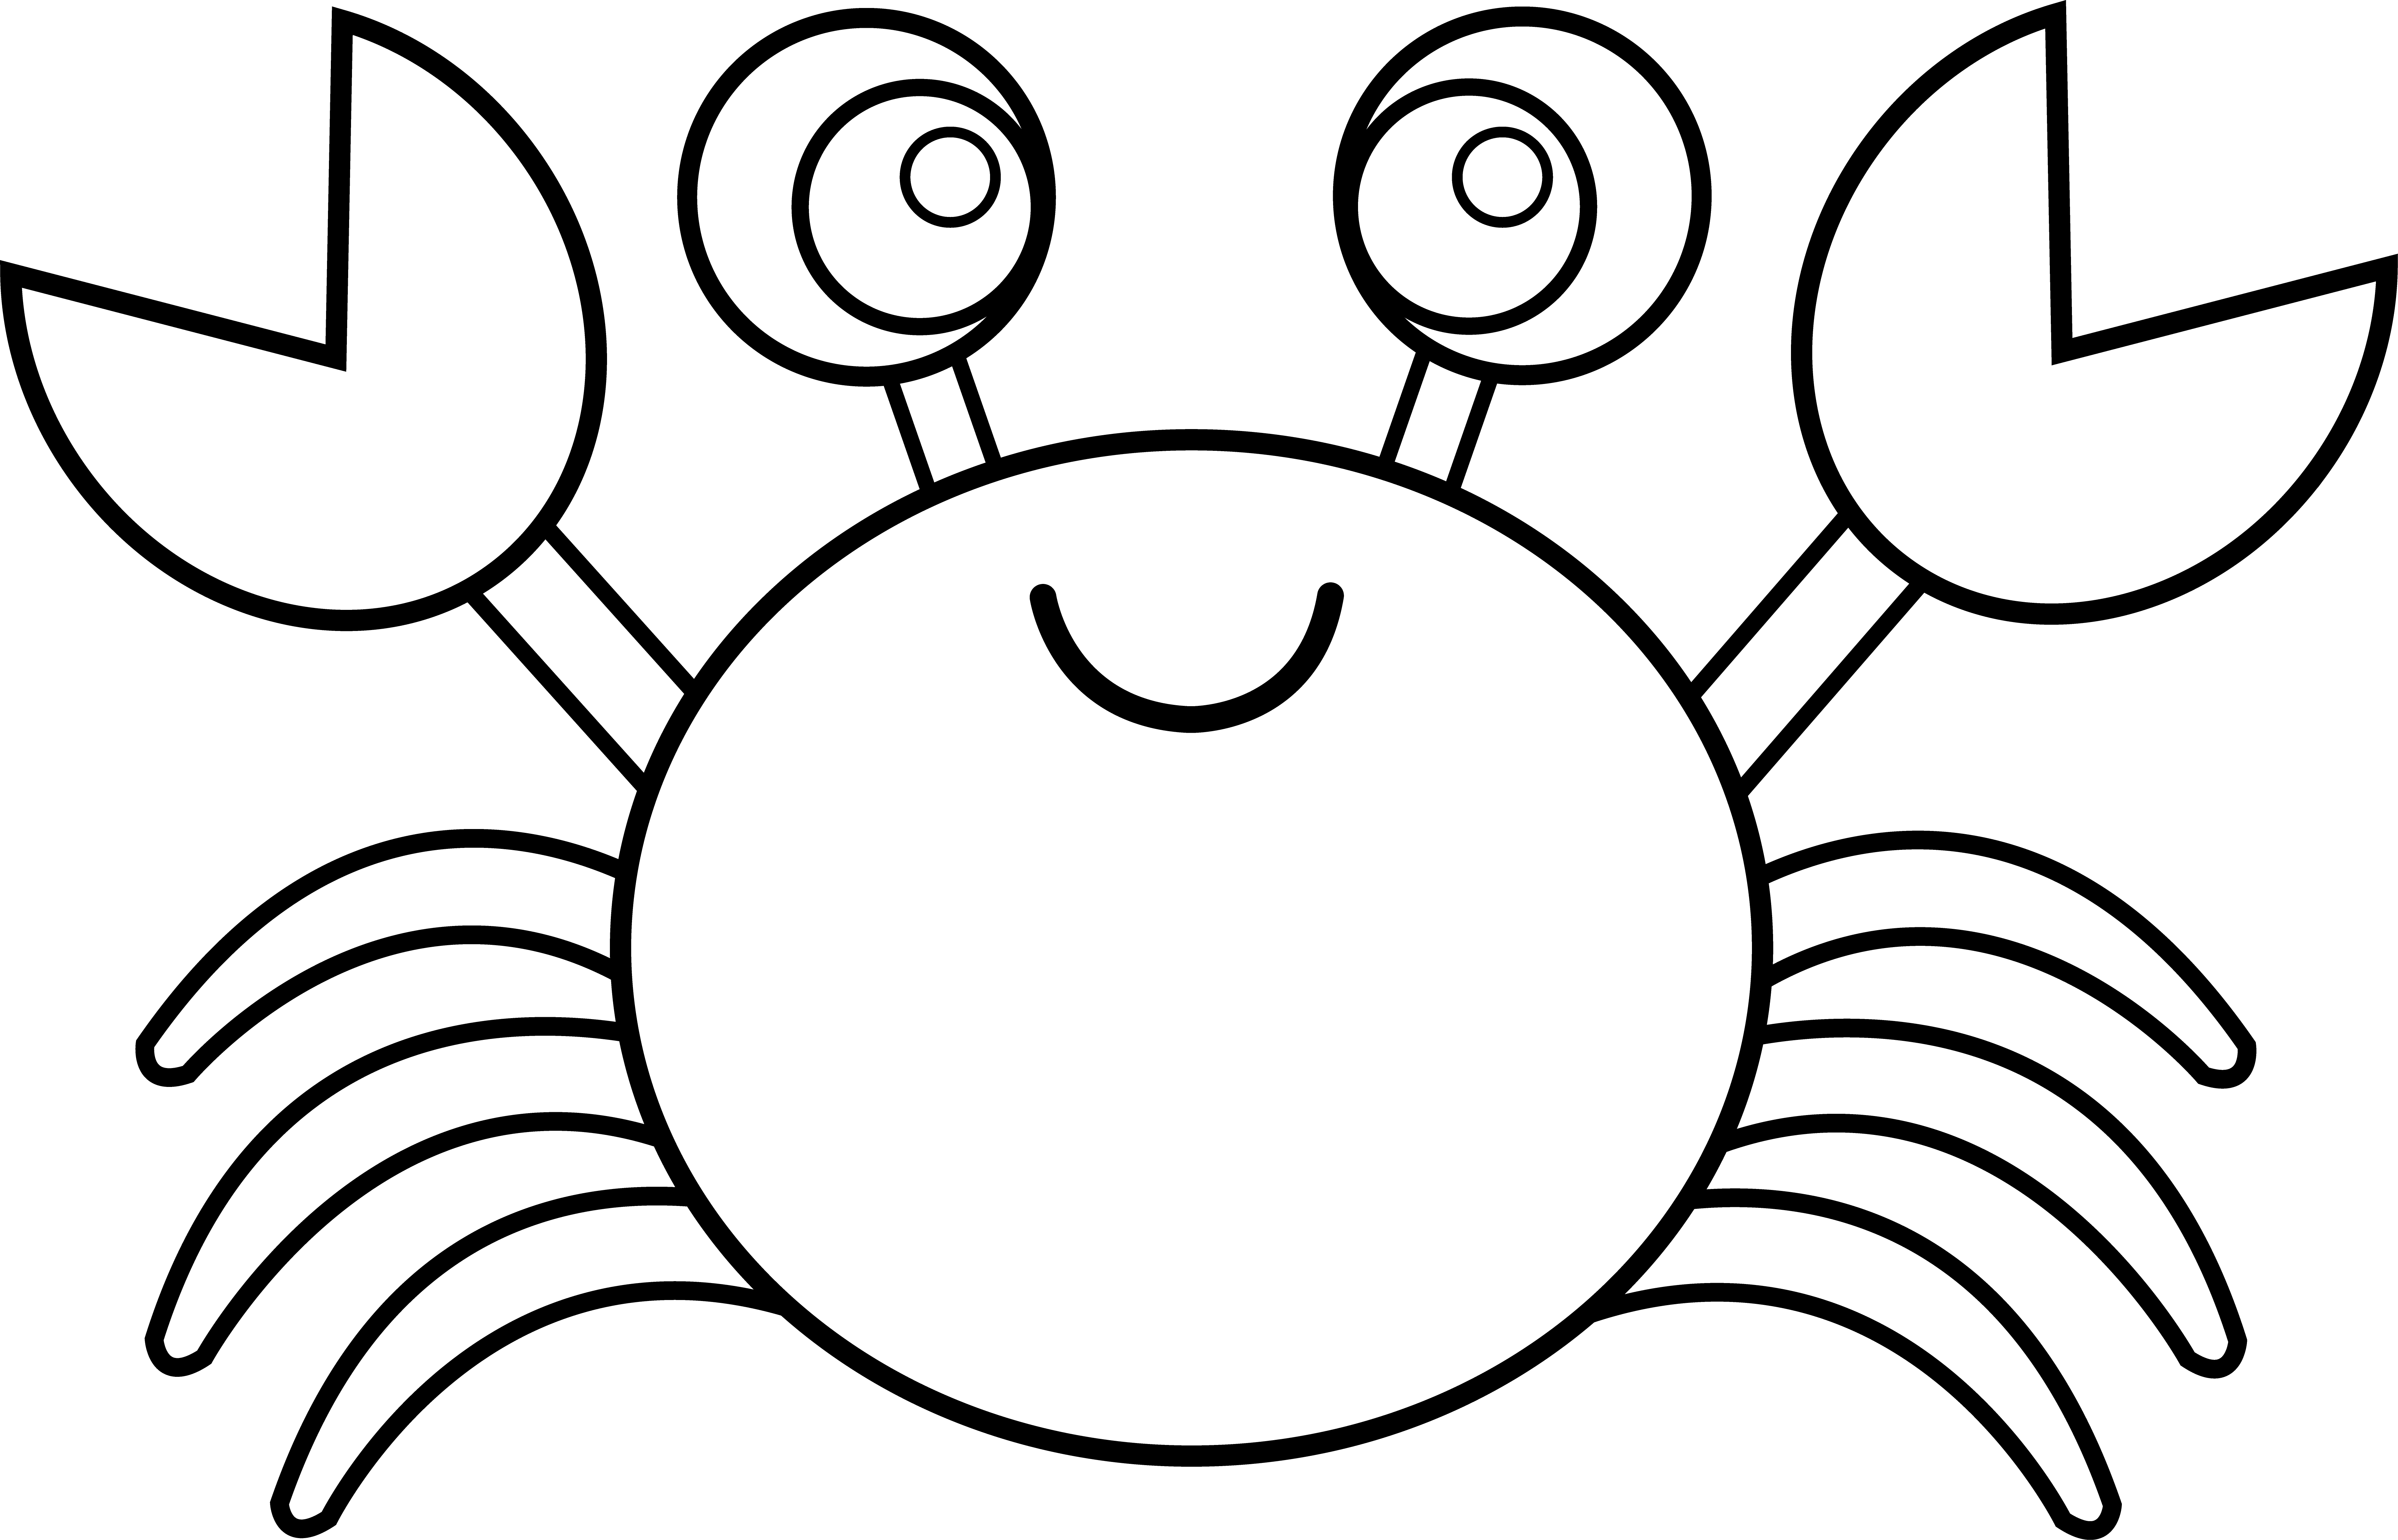 Crab  black and white blue crab clipart black and white free